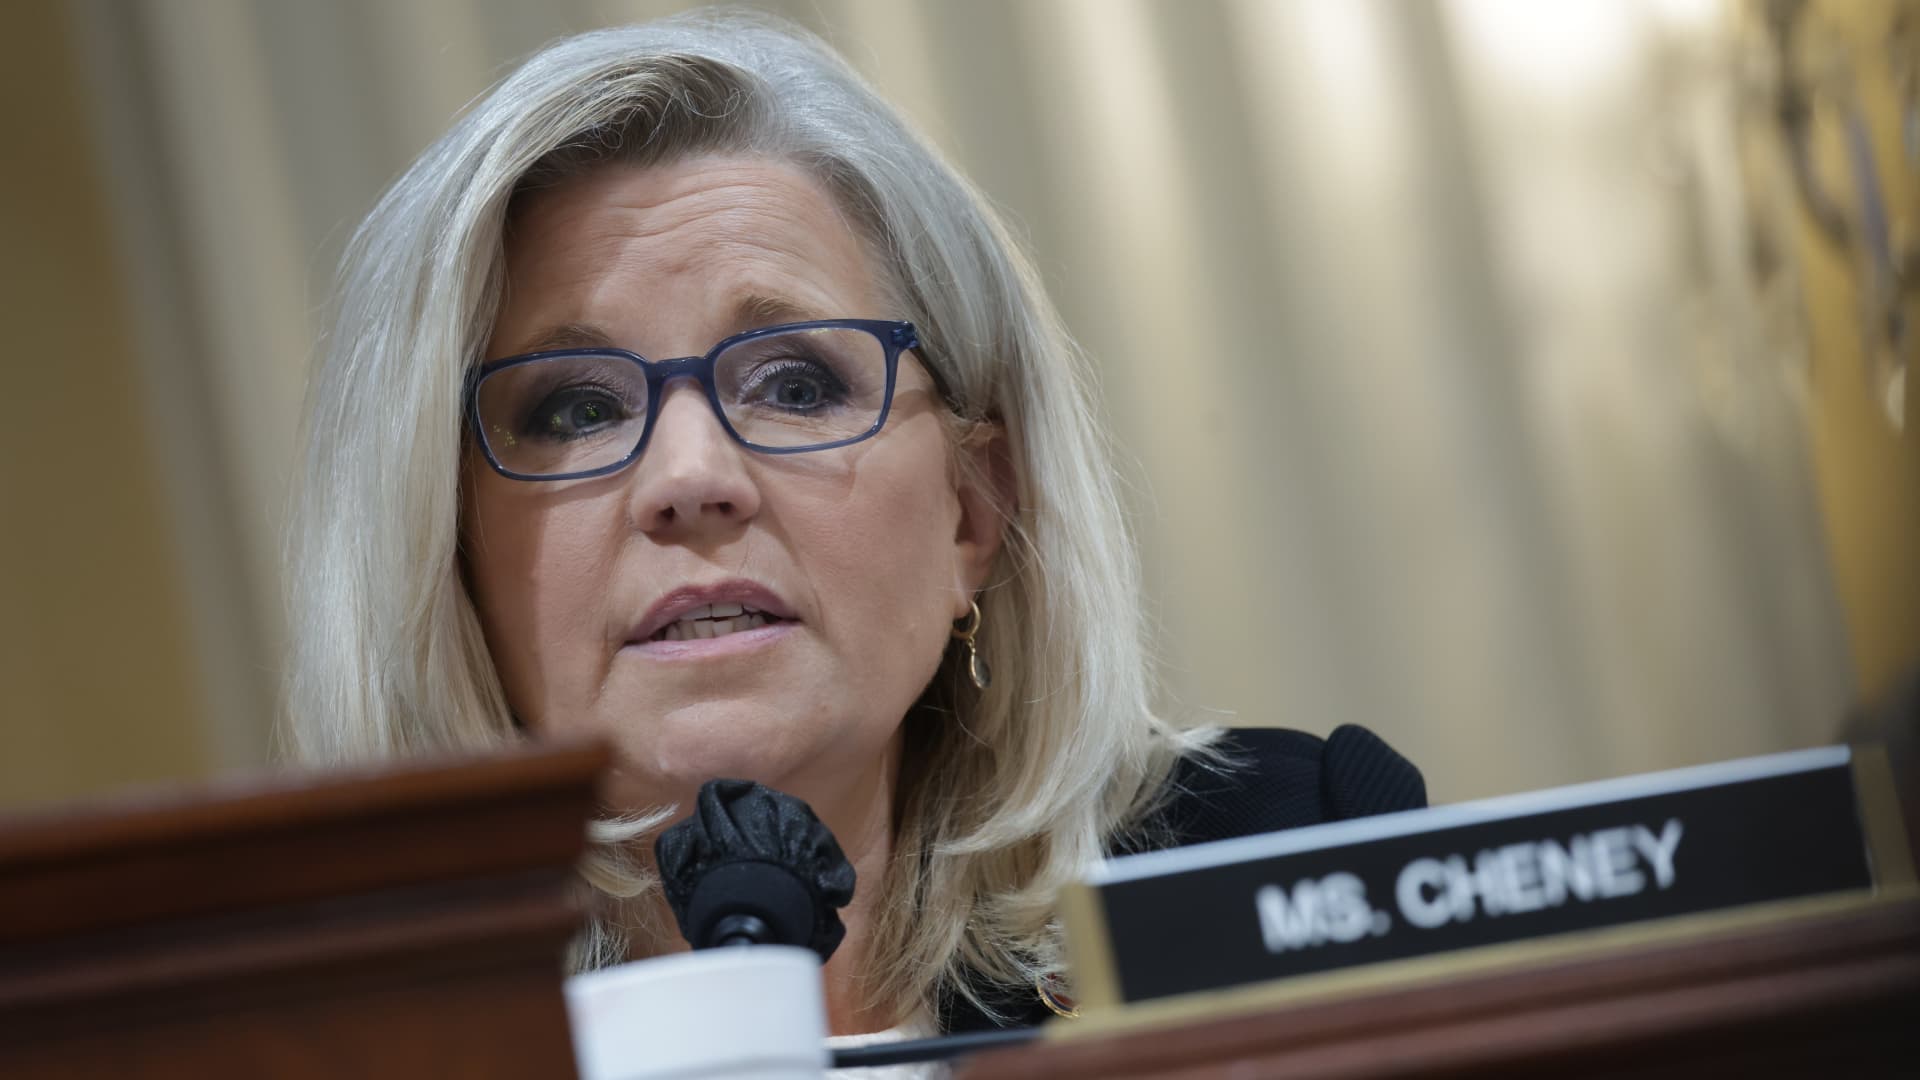 Rep. Liz Cheney (R-WY), Vice Chairwoman of the Select Committee to Investigate the January 6th Attack on the U.S. Capitol, delivers remarks during the seventh hearing on the January 6th investigation in the Cannon House Office Building on July 12, 2022 in Washington, DC.